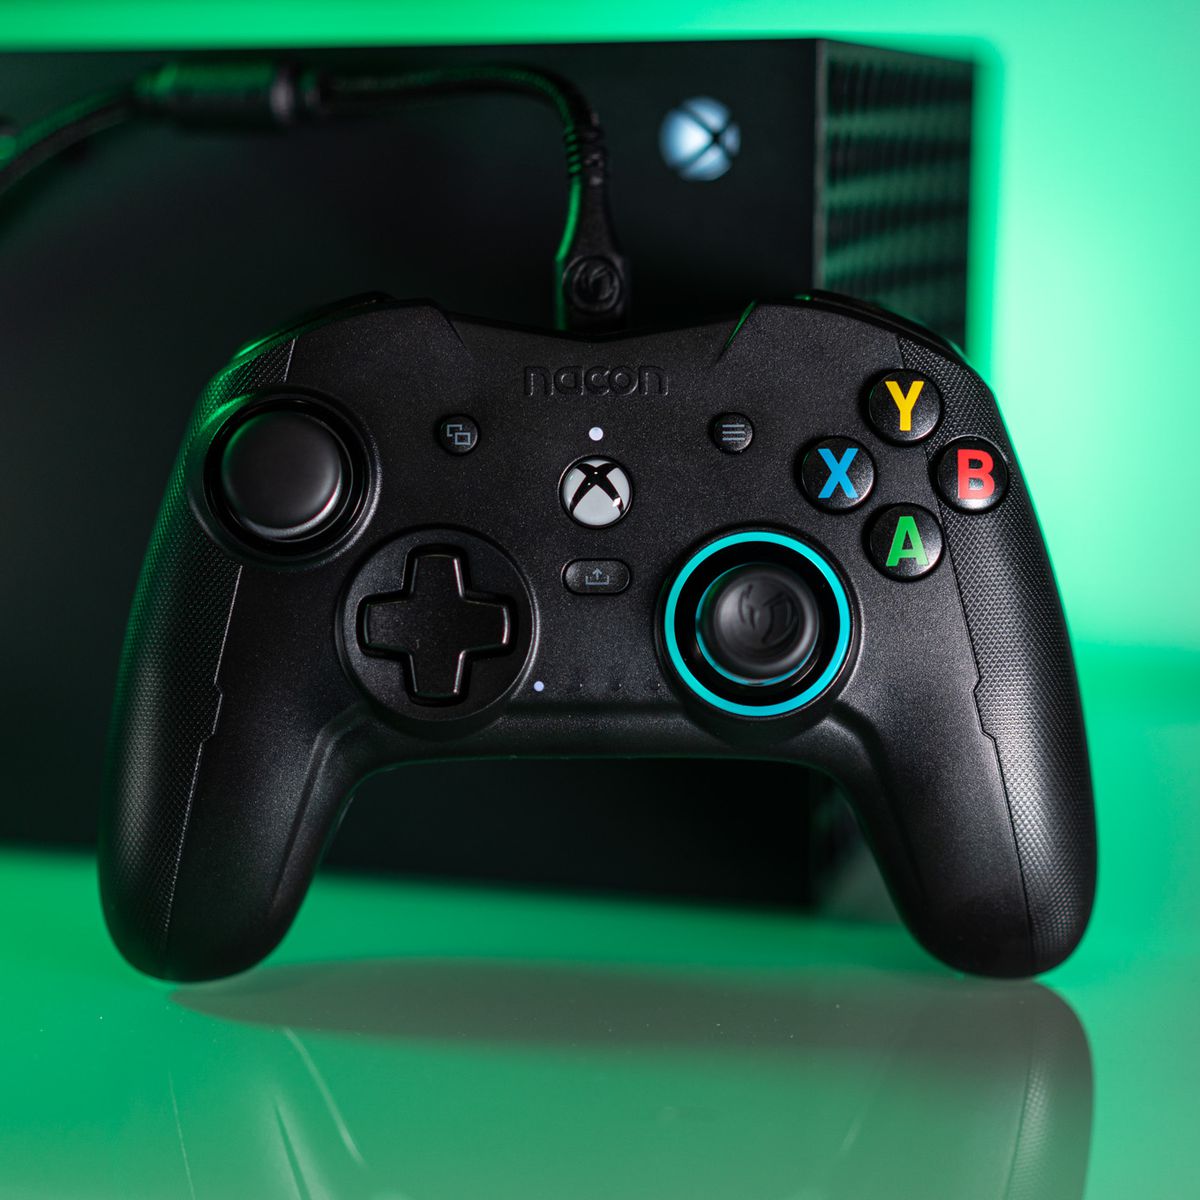 What is the best controller for Xbox consoles?